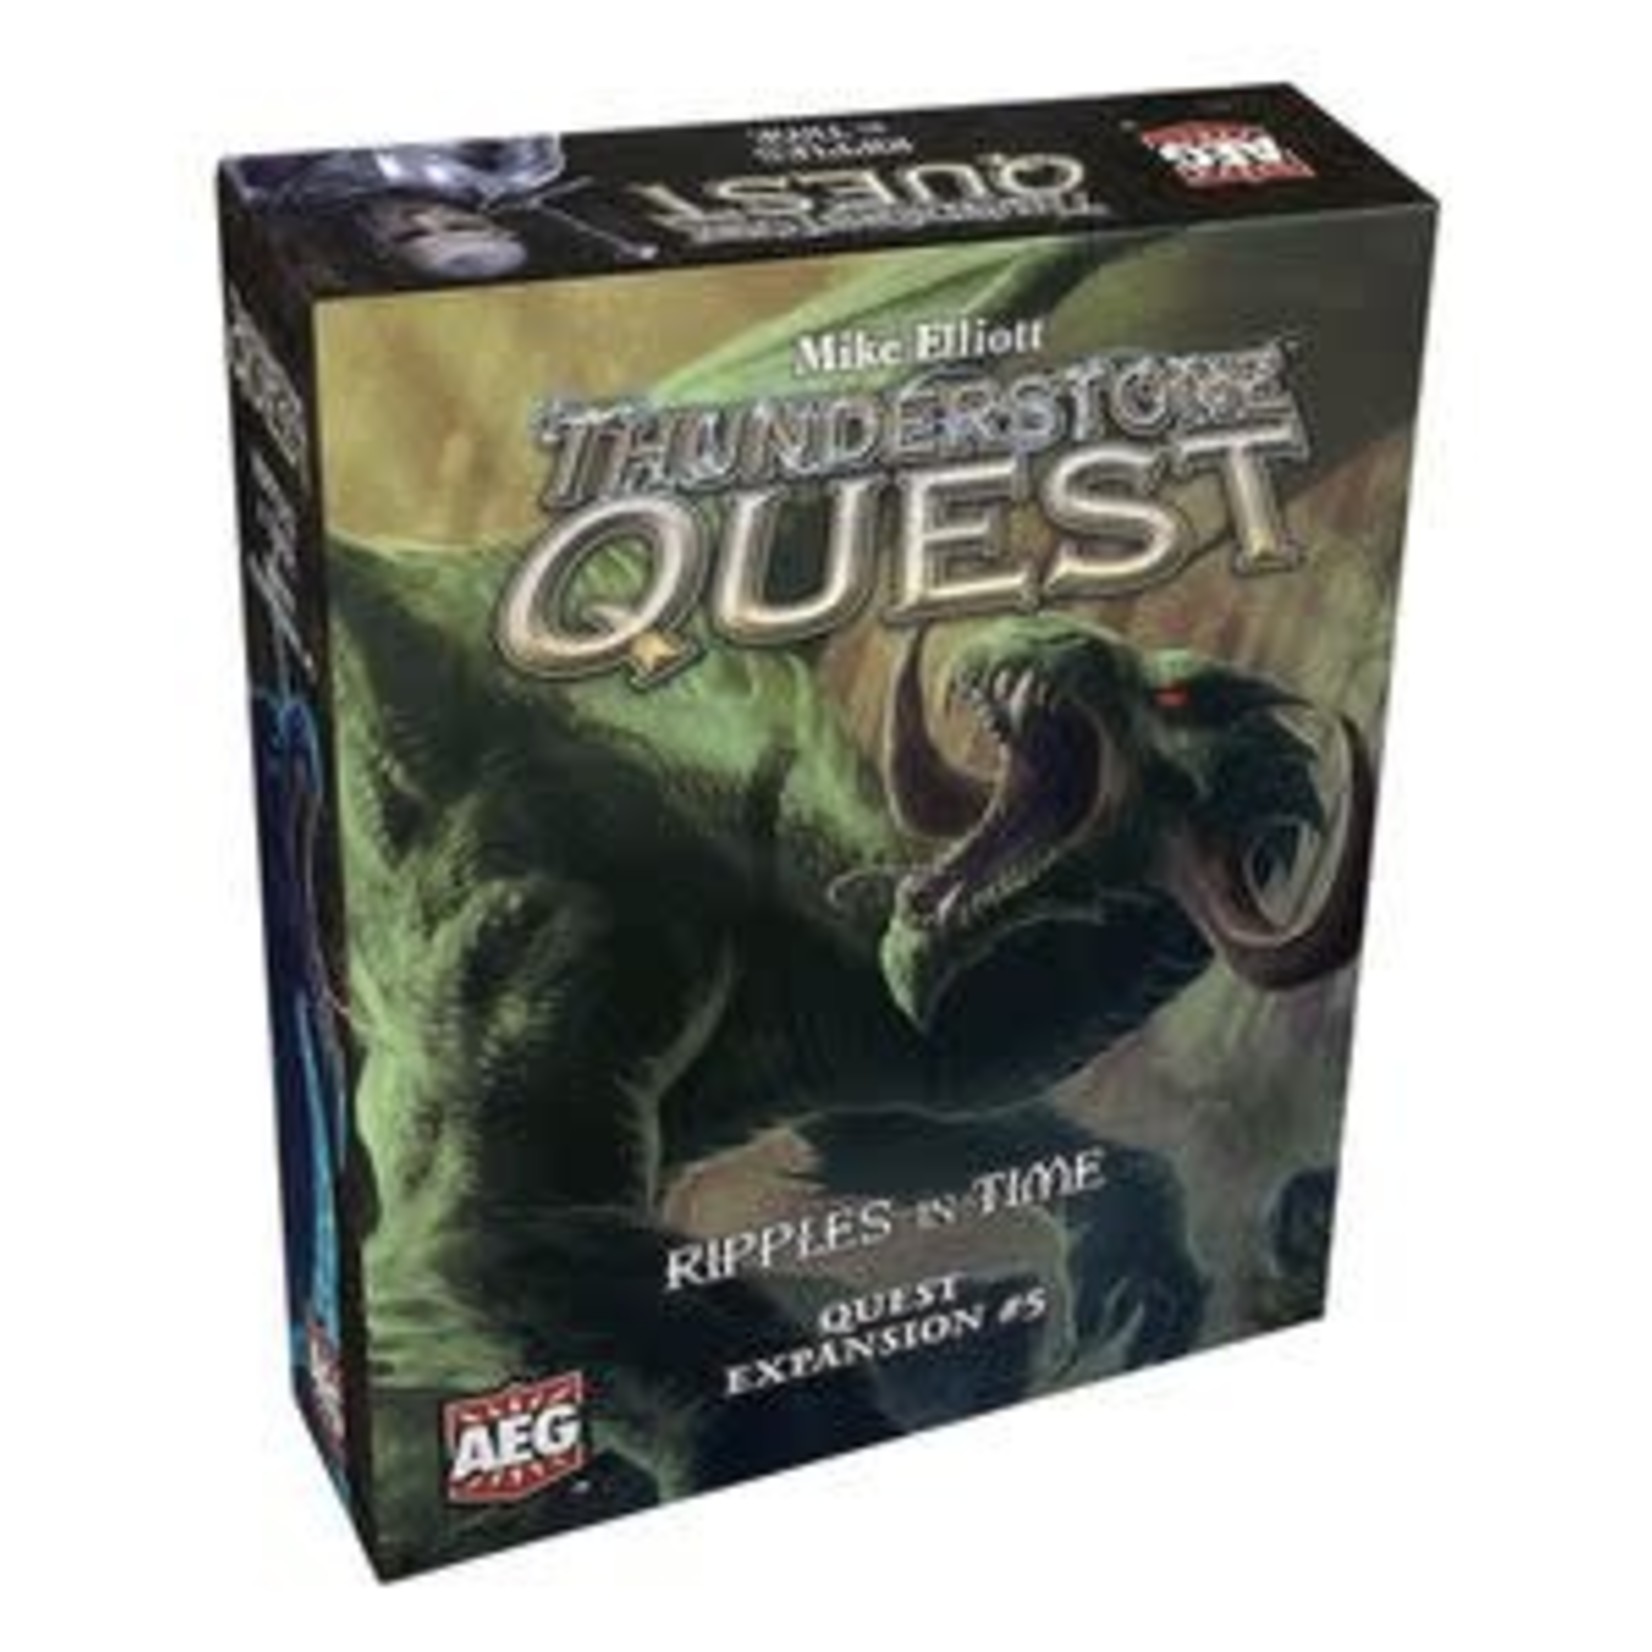 Thunderstone Quest: Ripples in TIme Expansion